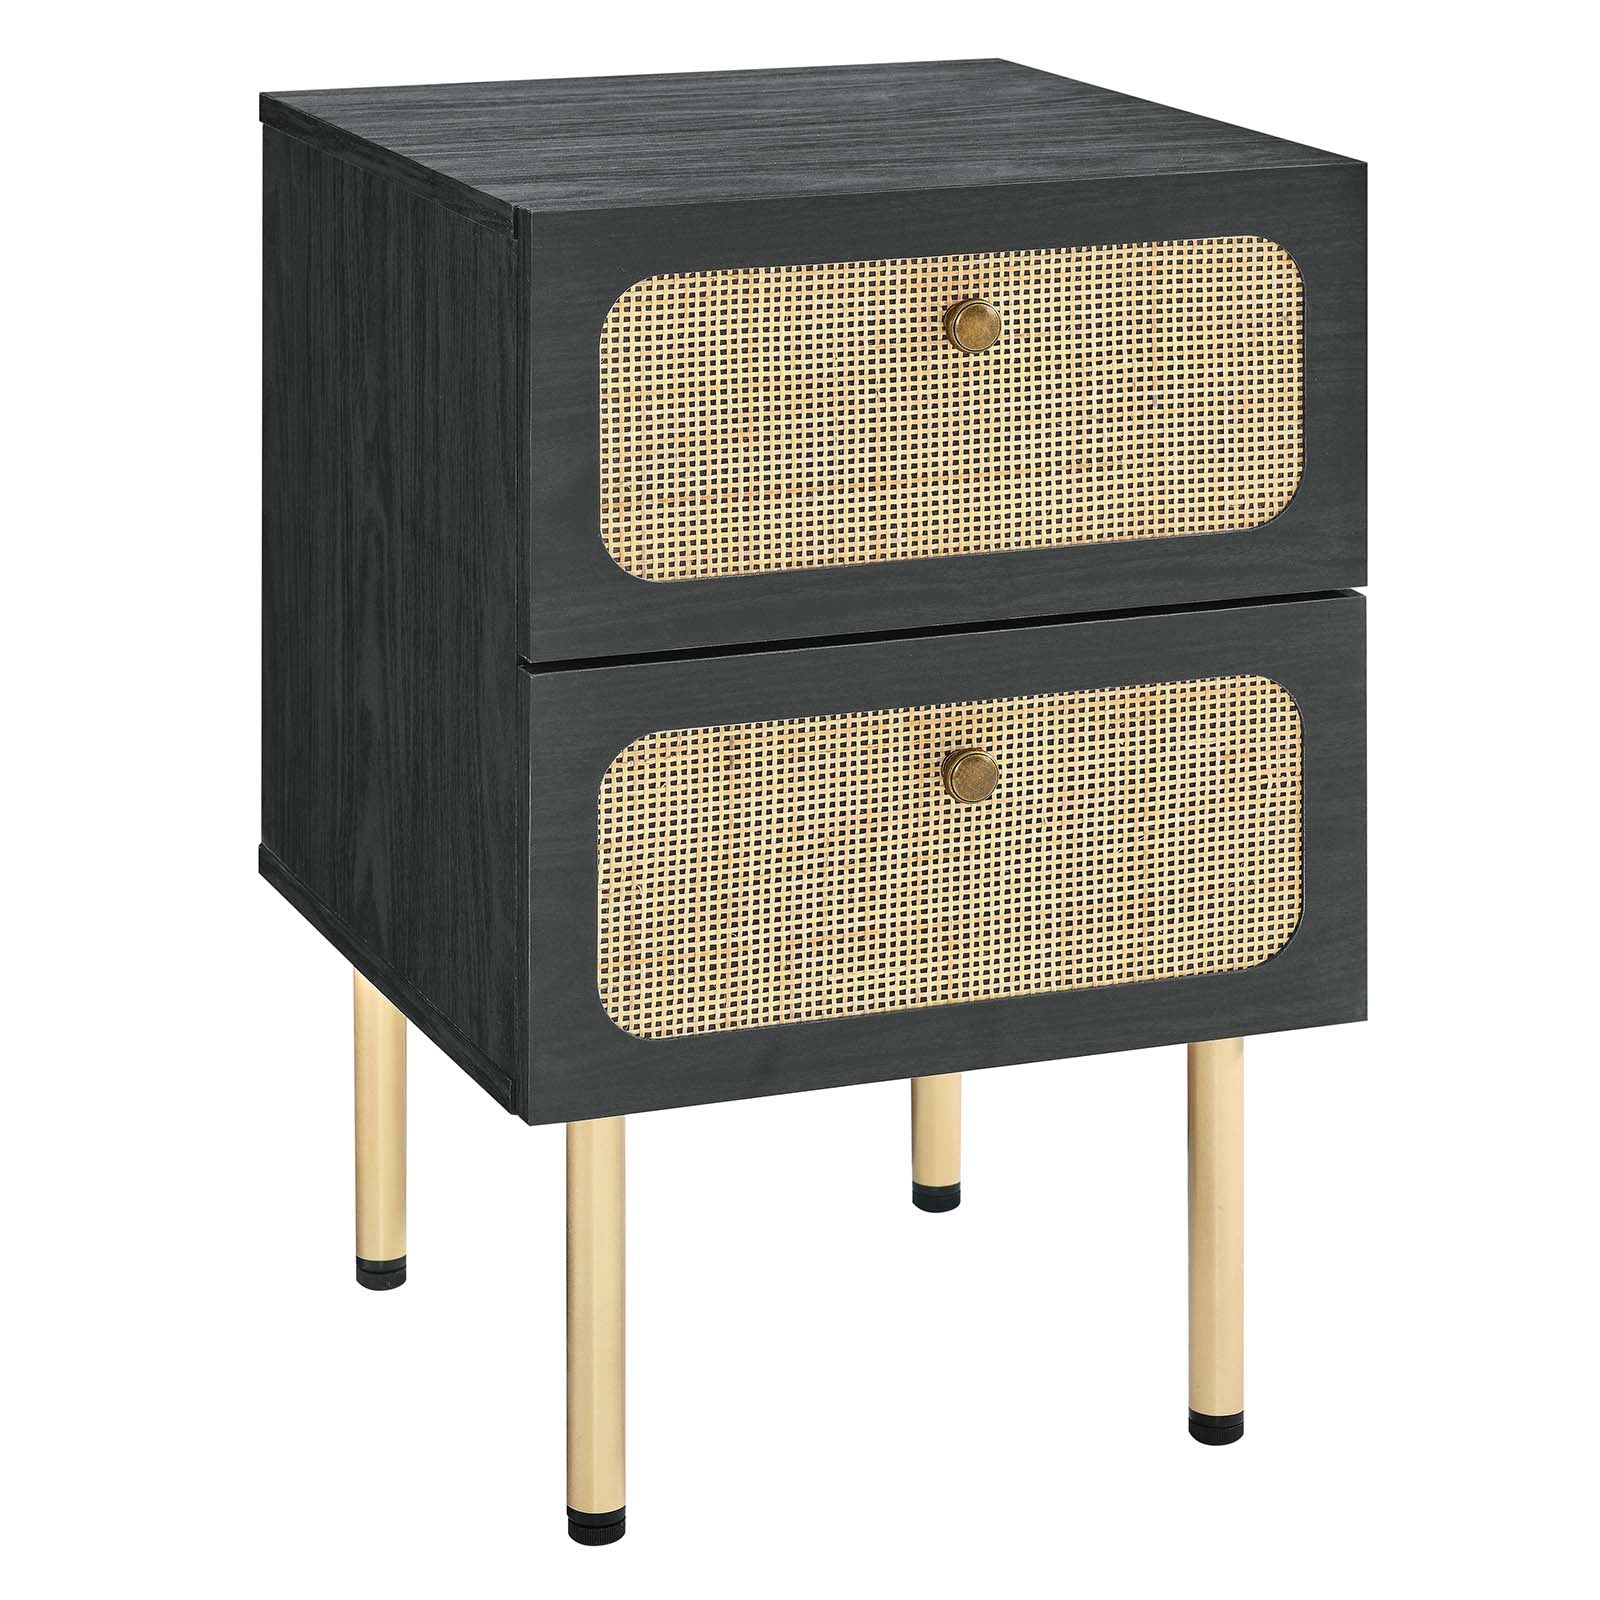 Chaucer 2-Drawer Nightstand - East Shore Modern Home Furnishings